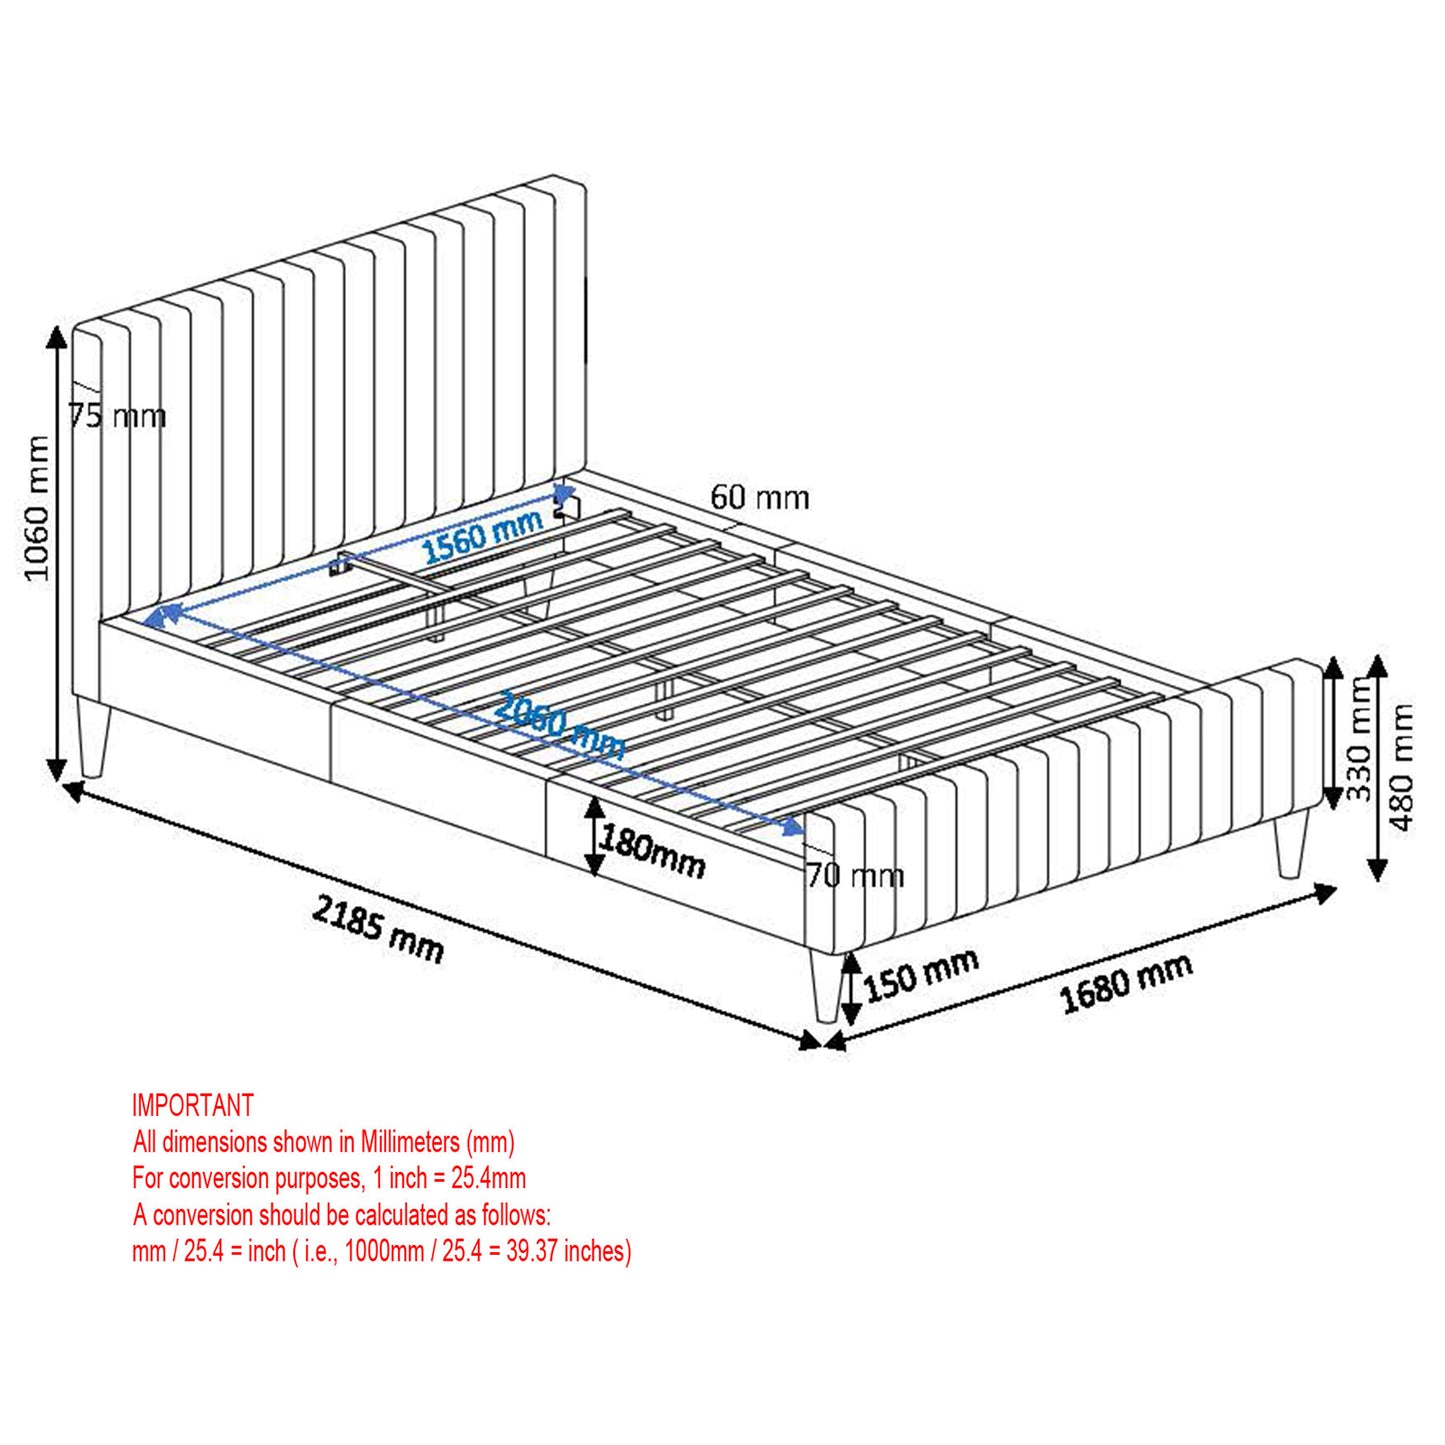 QUEEN SIZE- (HANNAH CHARCOAL)- FABRIC- BED FRAME- WITH SLATS